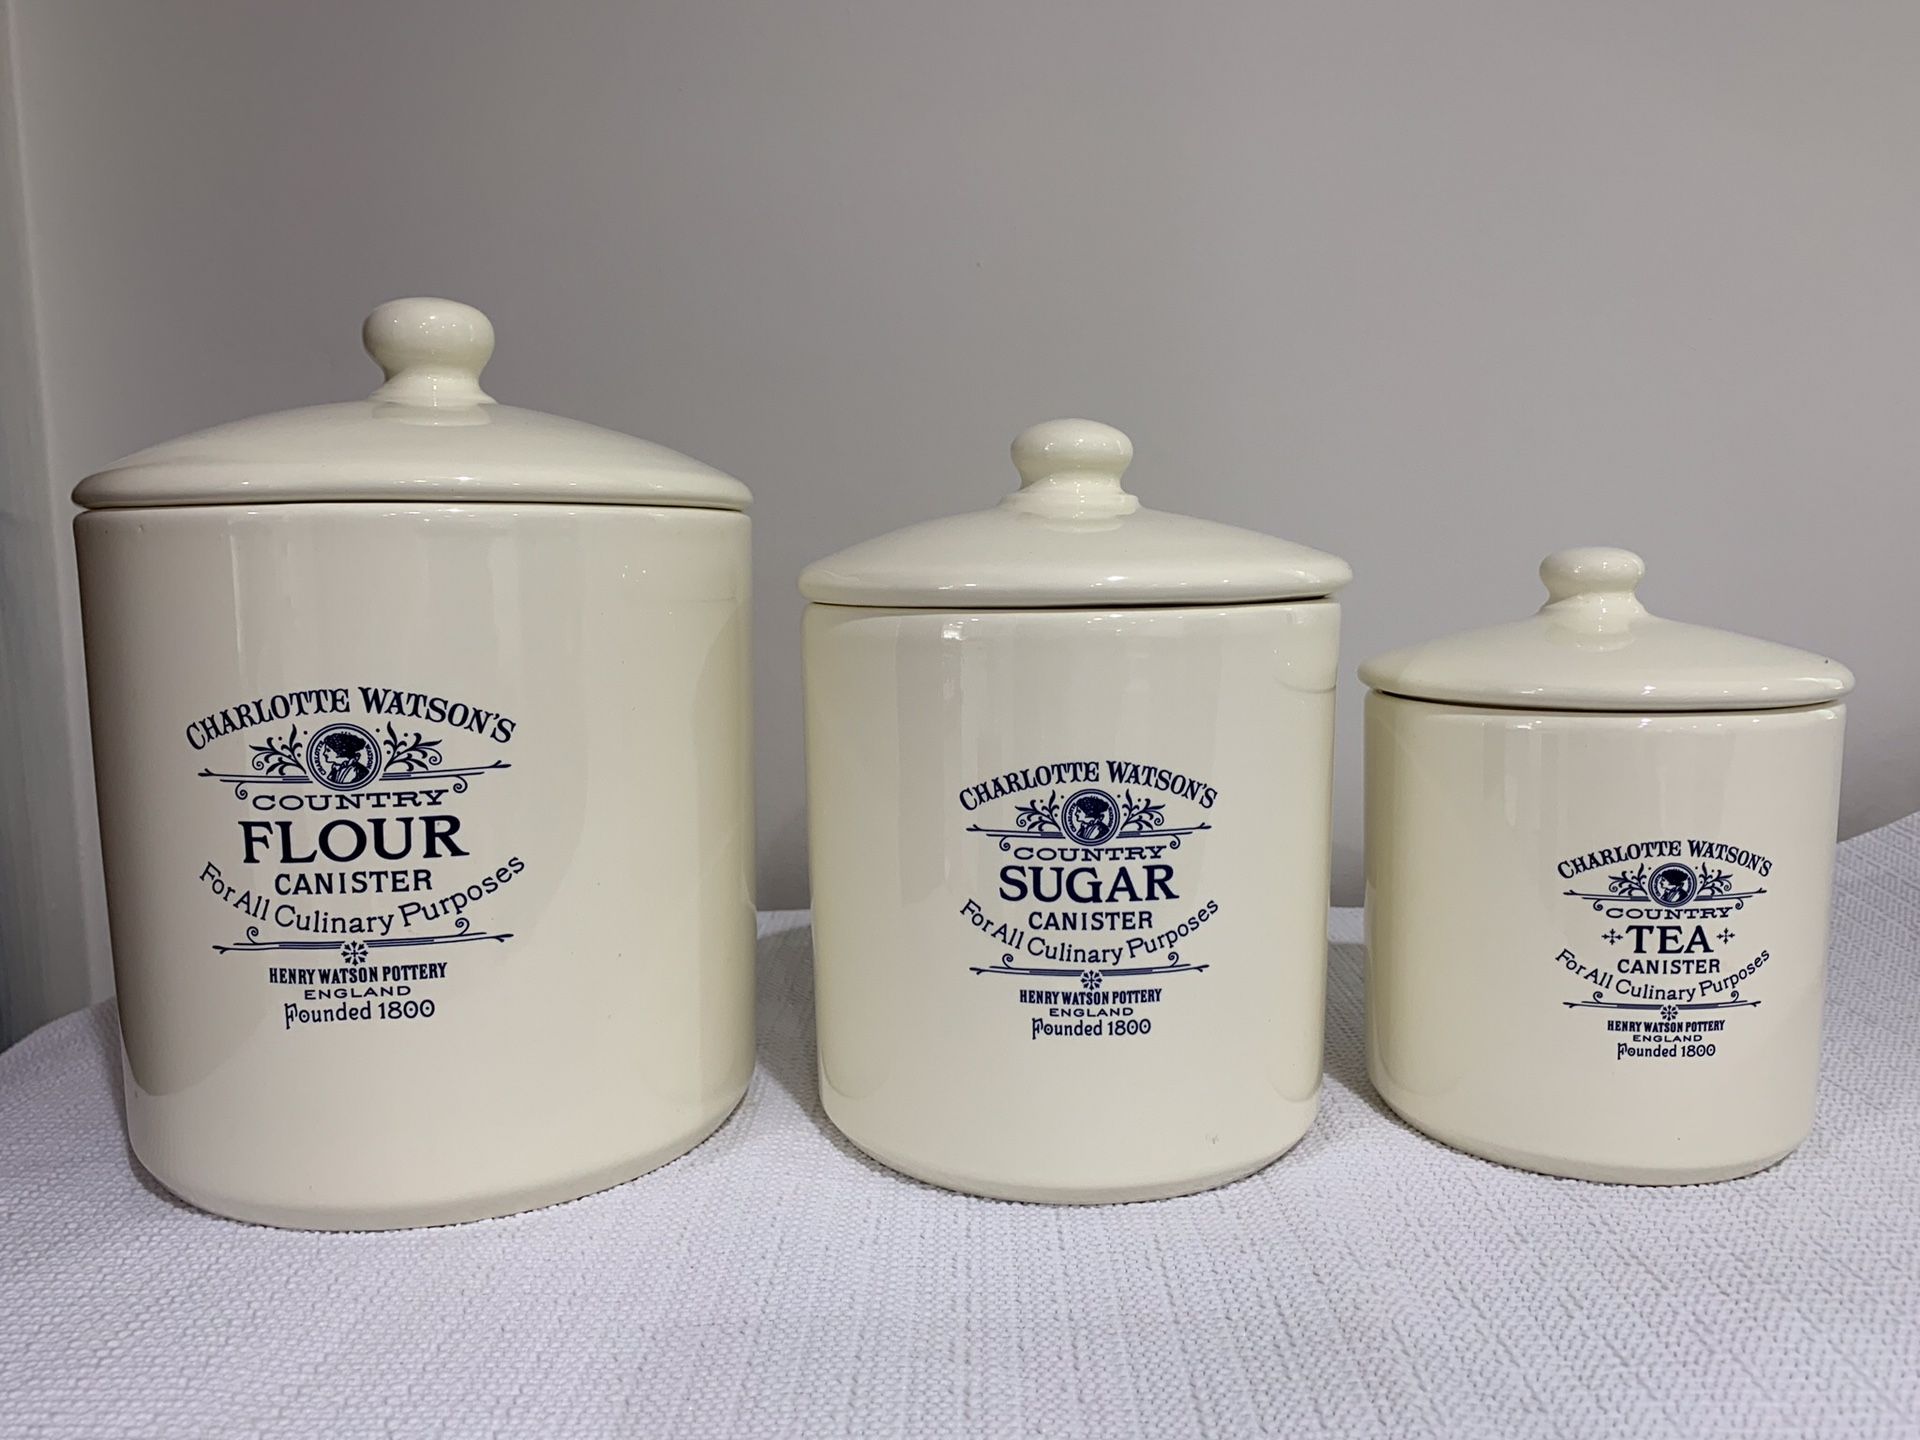 Heavy ceramic kitchen canisters with lids - brand is Williams Sonoma